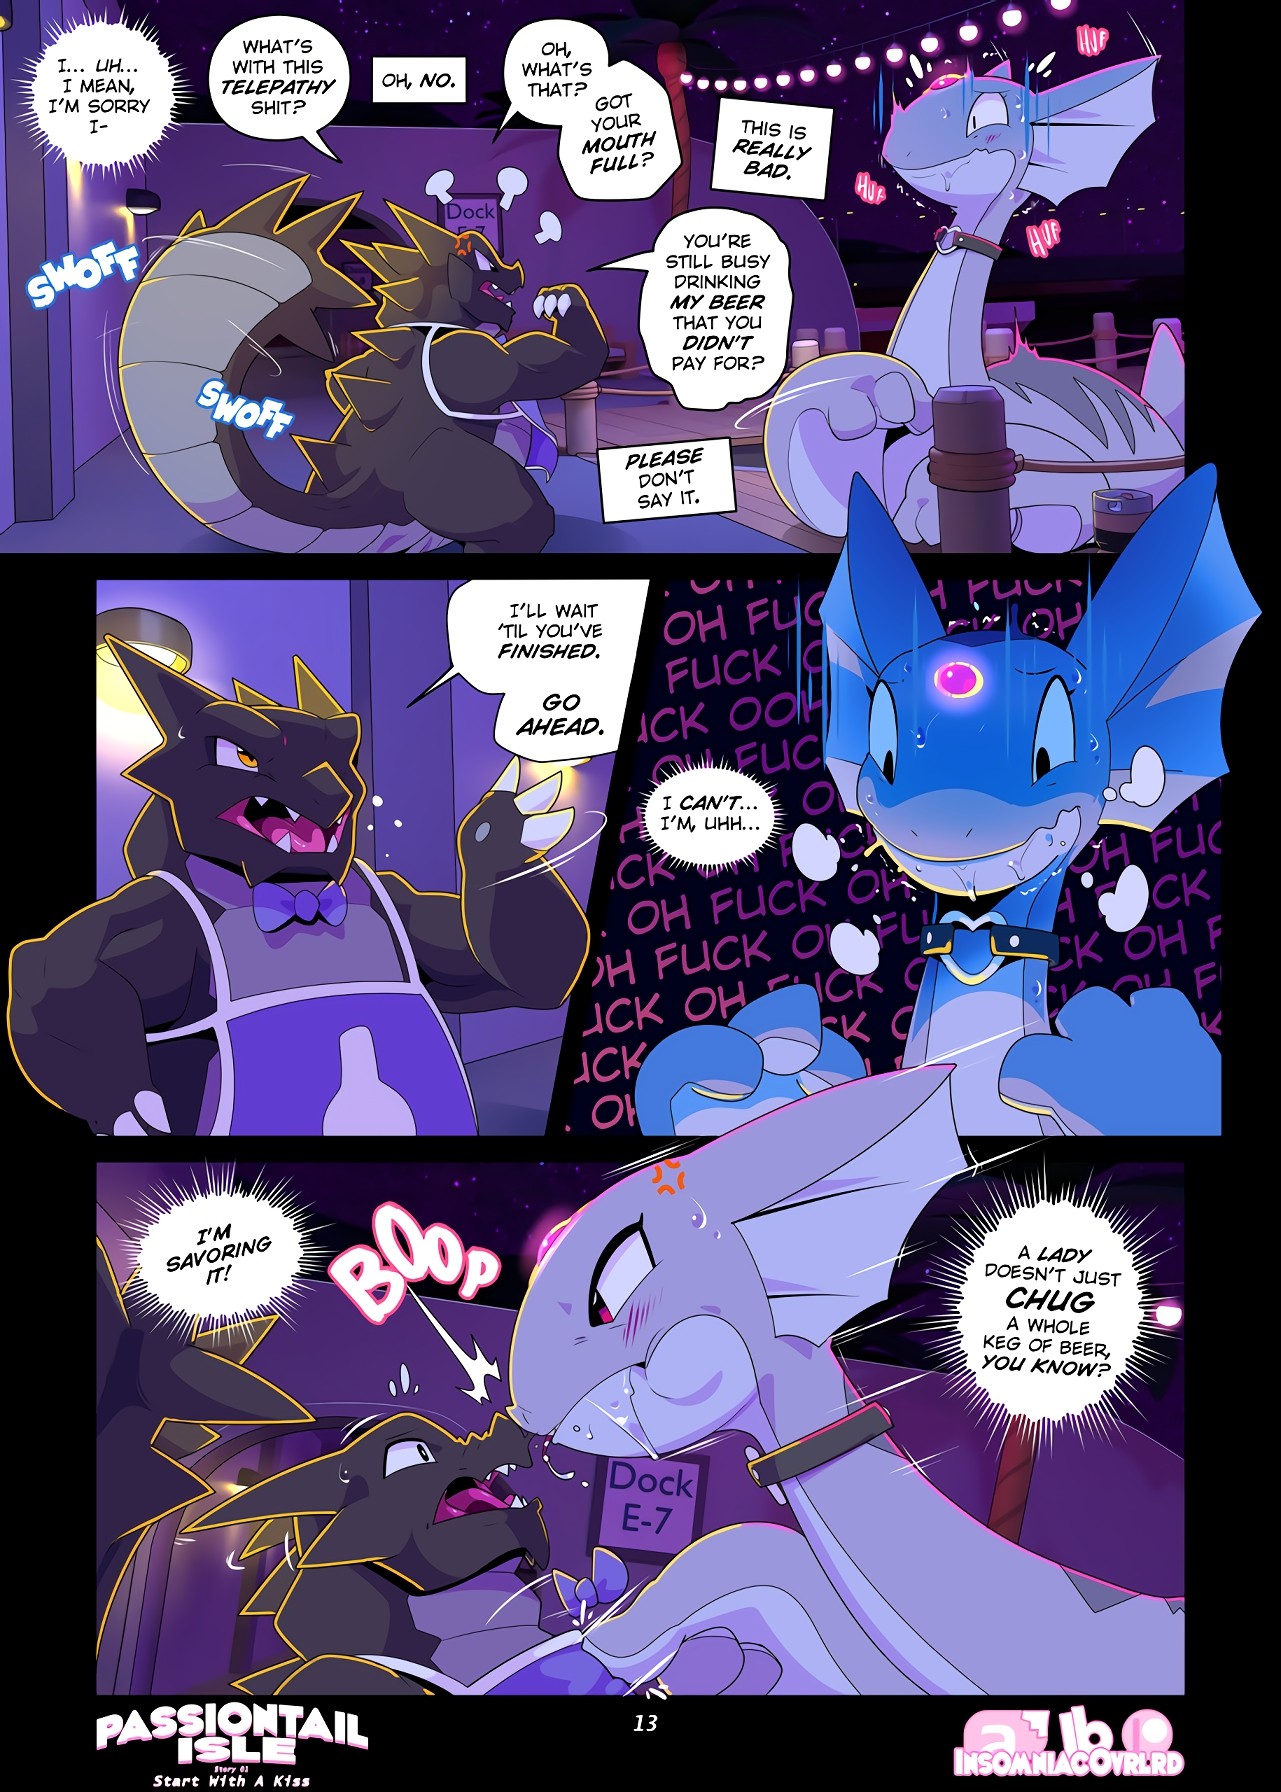 Passiontail Isle by Insomniacovrlrd porn comic picture 14